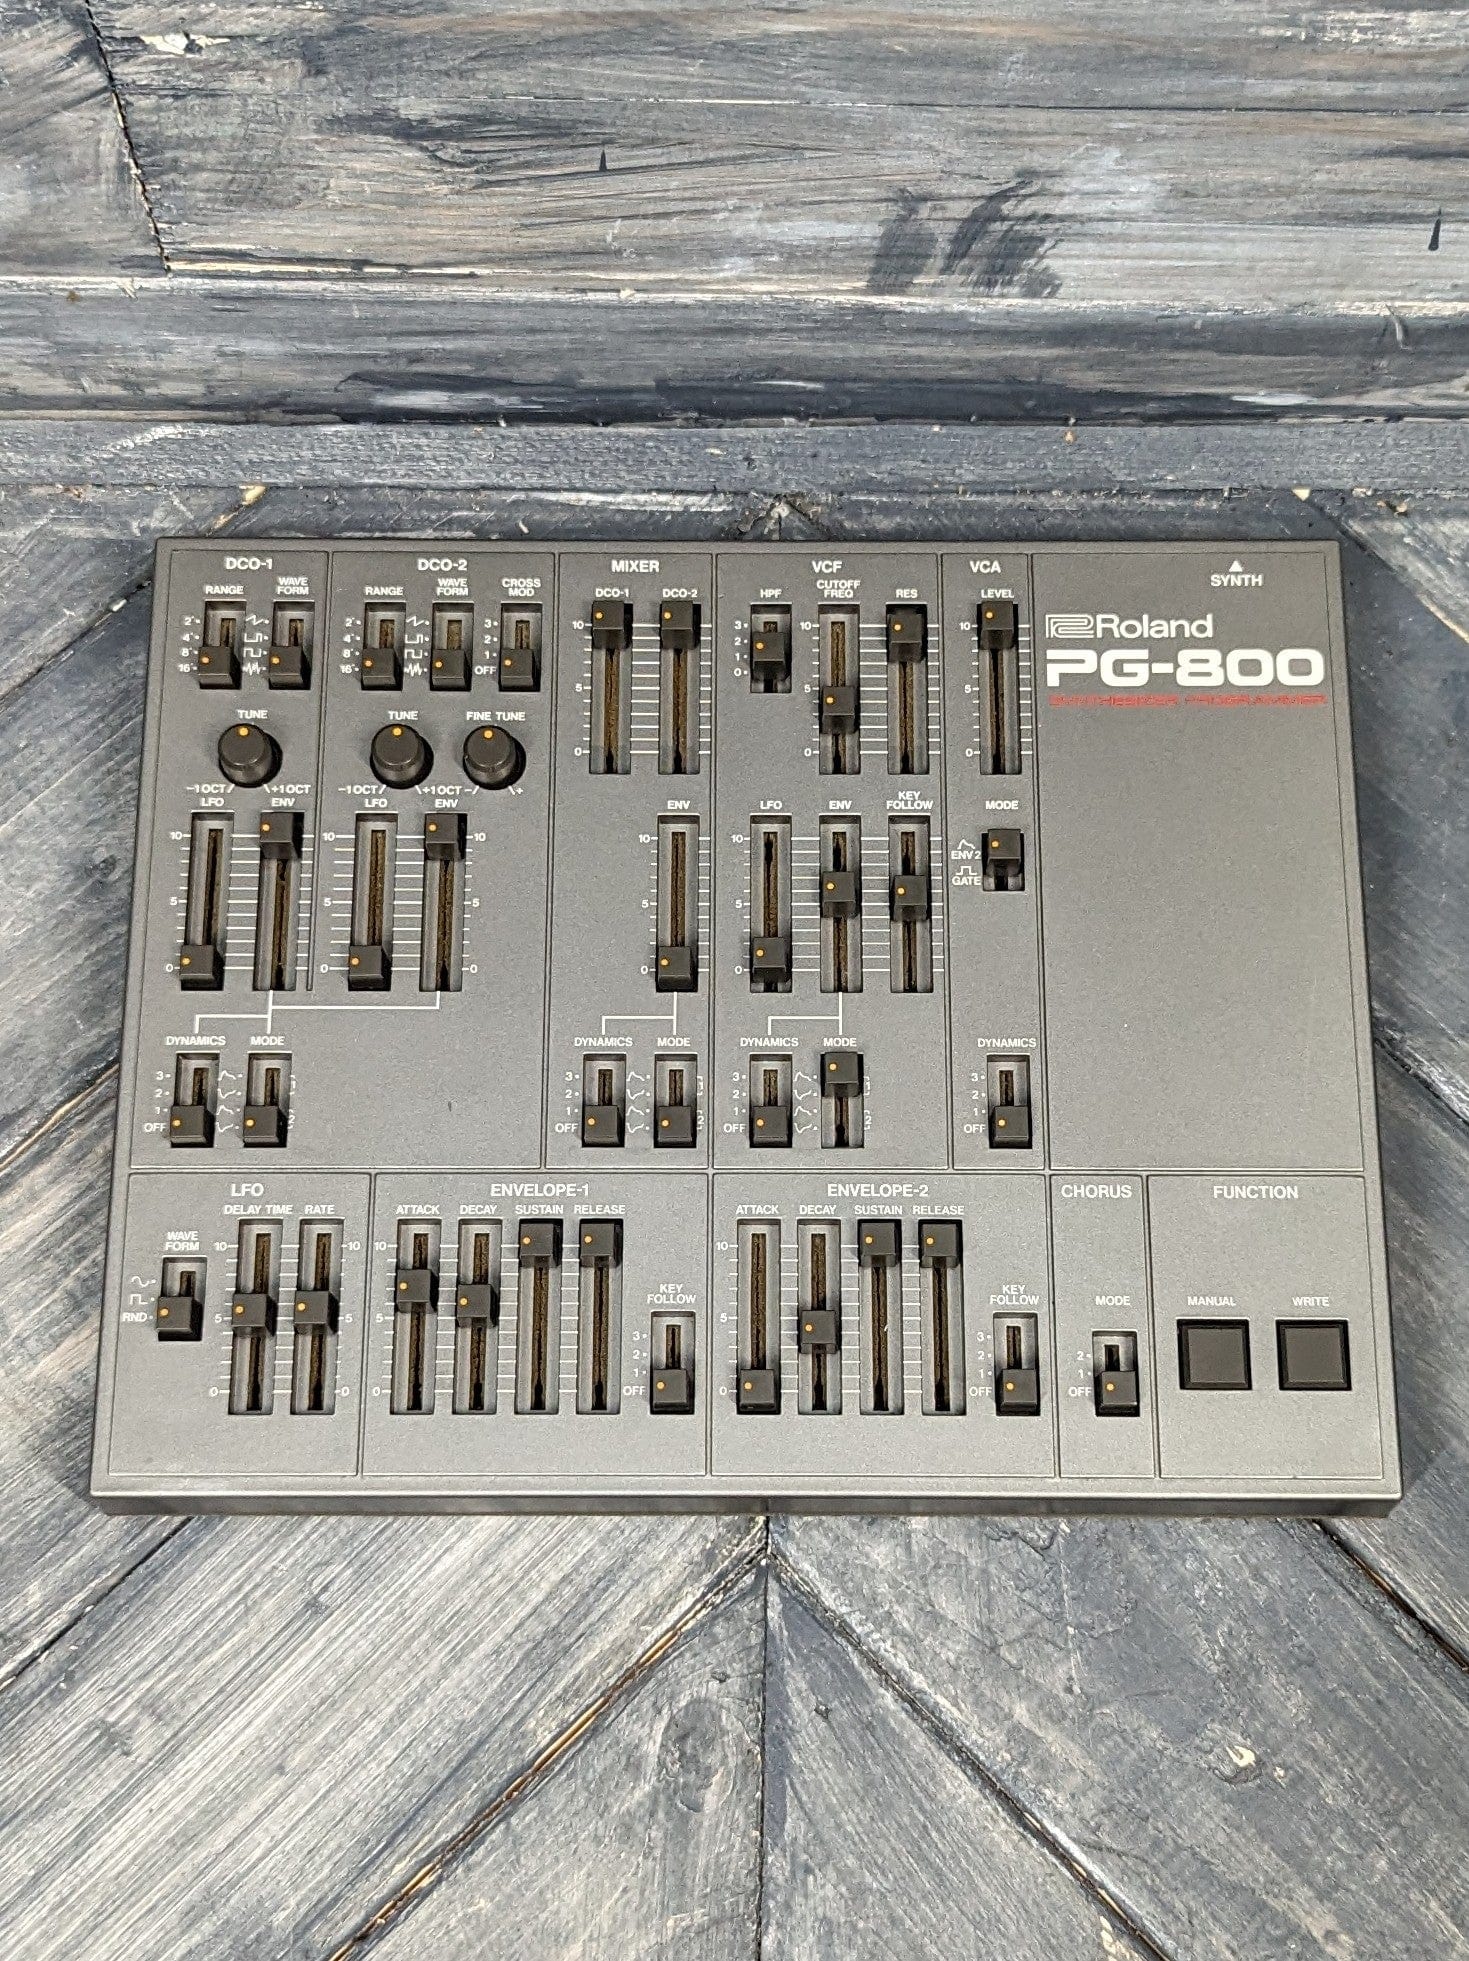 Used Roland PG-800 top of the unit